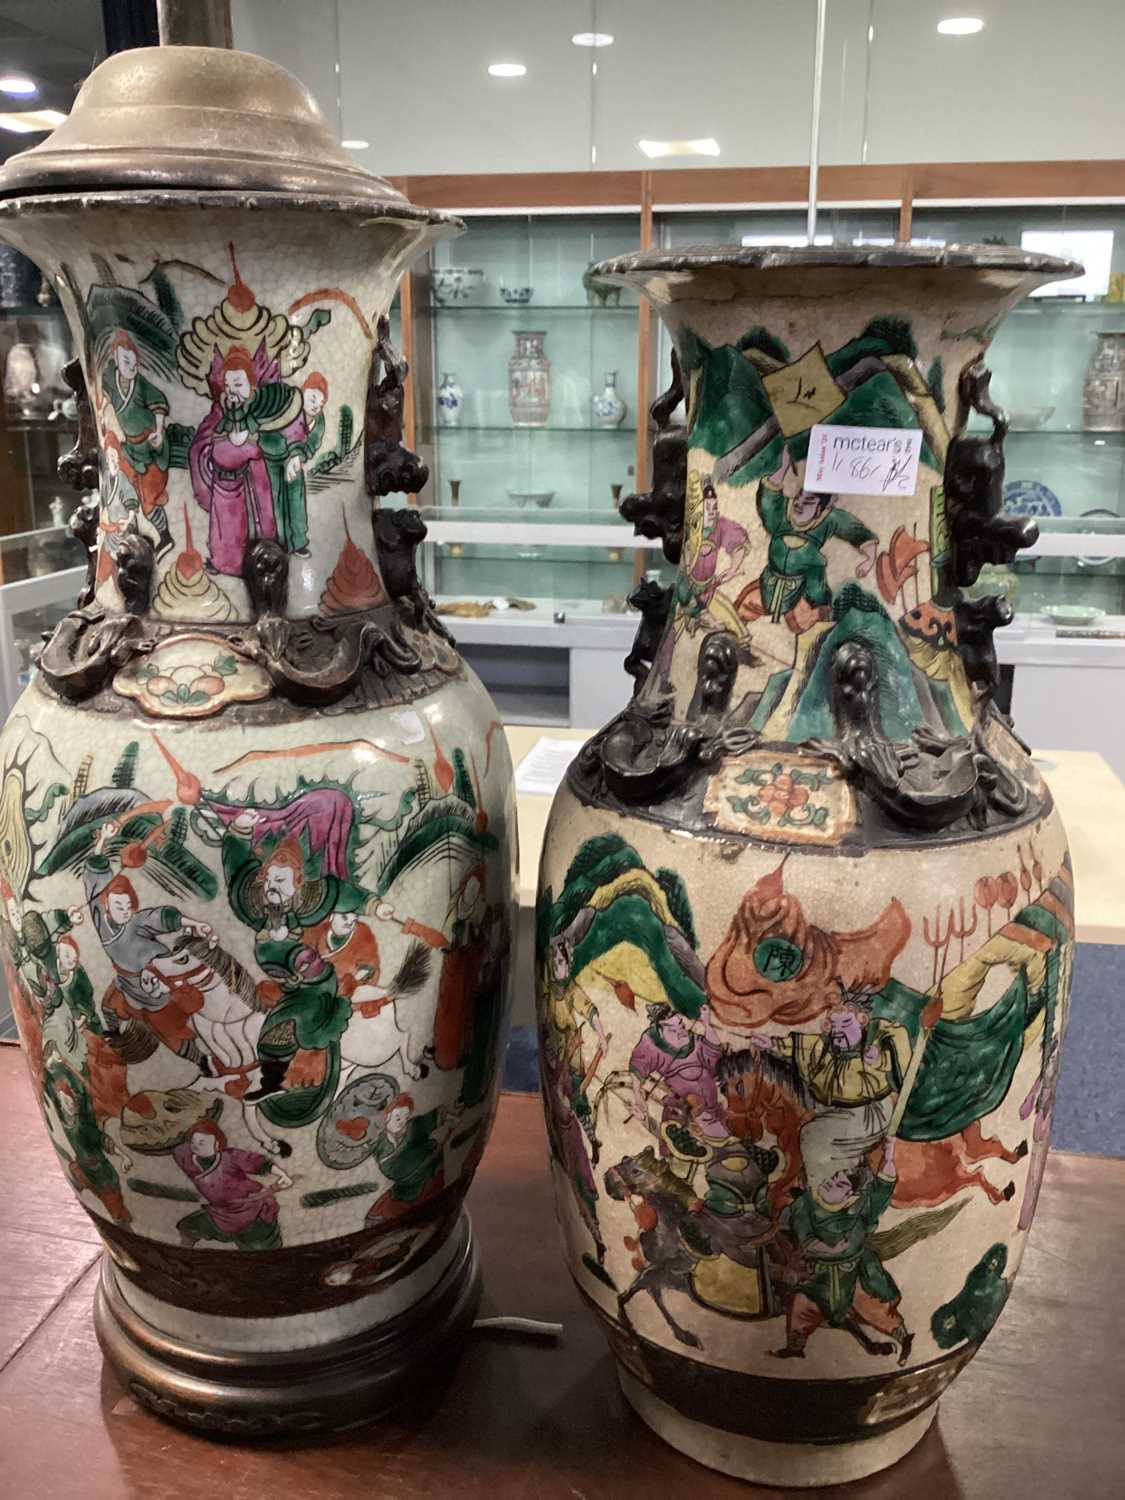 TWO CHINESE CRACKLEGLAZE VASES, LATE 19TH/EARLY 20TH CENTURY - Image 2 of 5